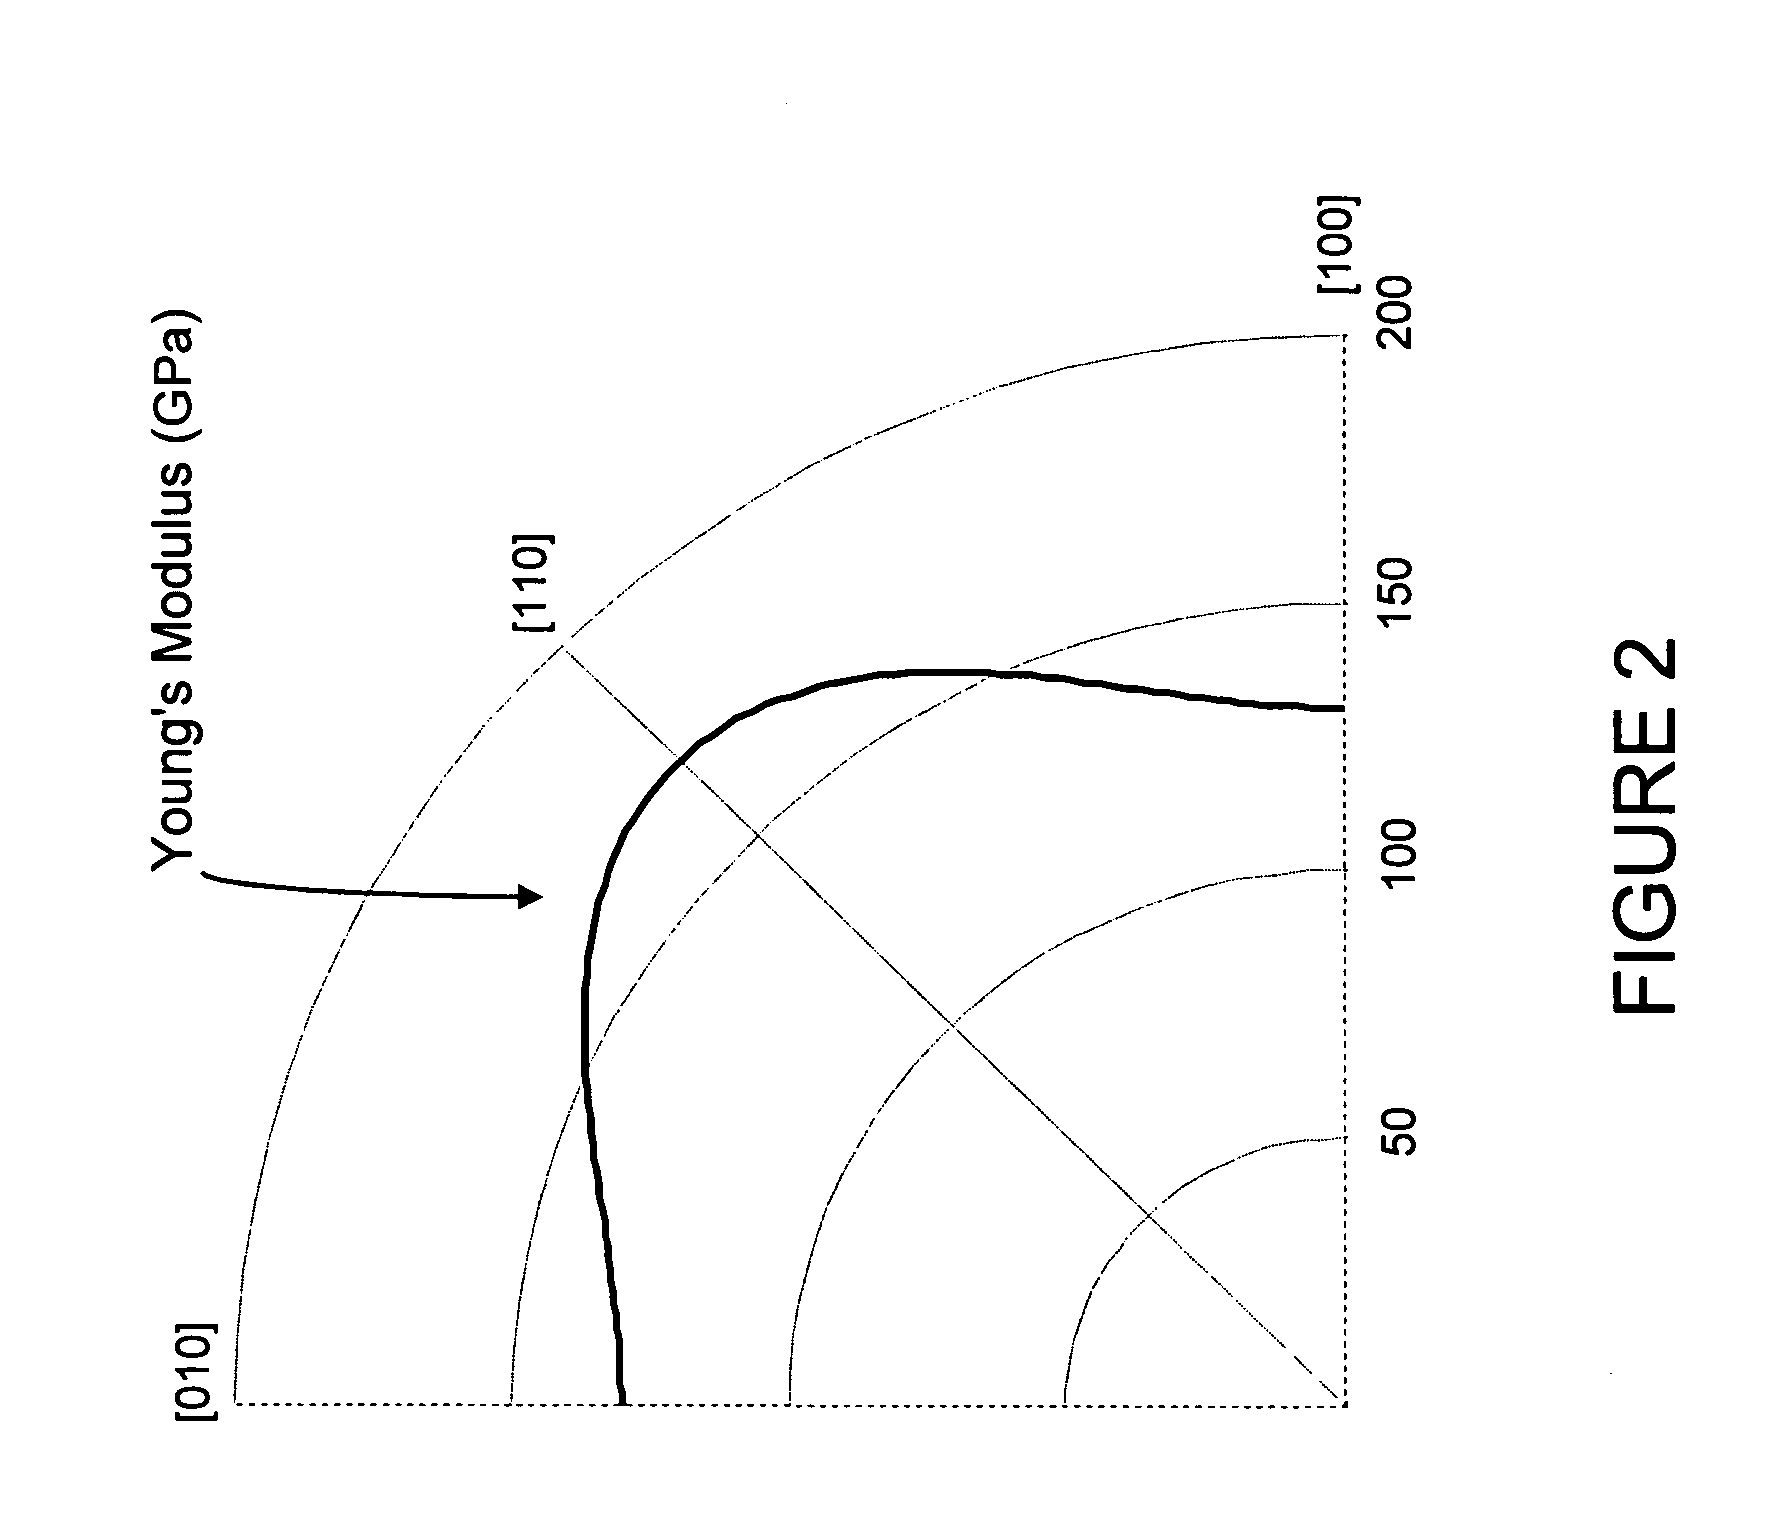 Oscillator system having a plurality of microelectromechanical resonators and method of designing, controlling or operating same